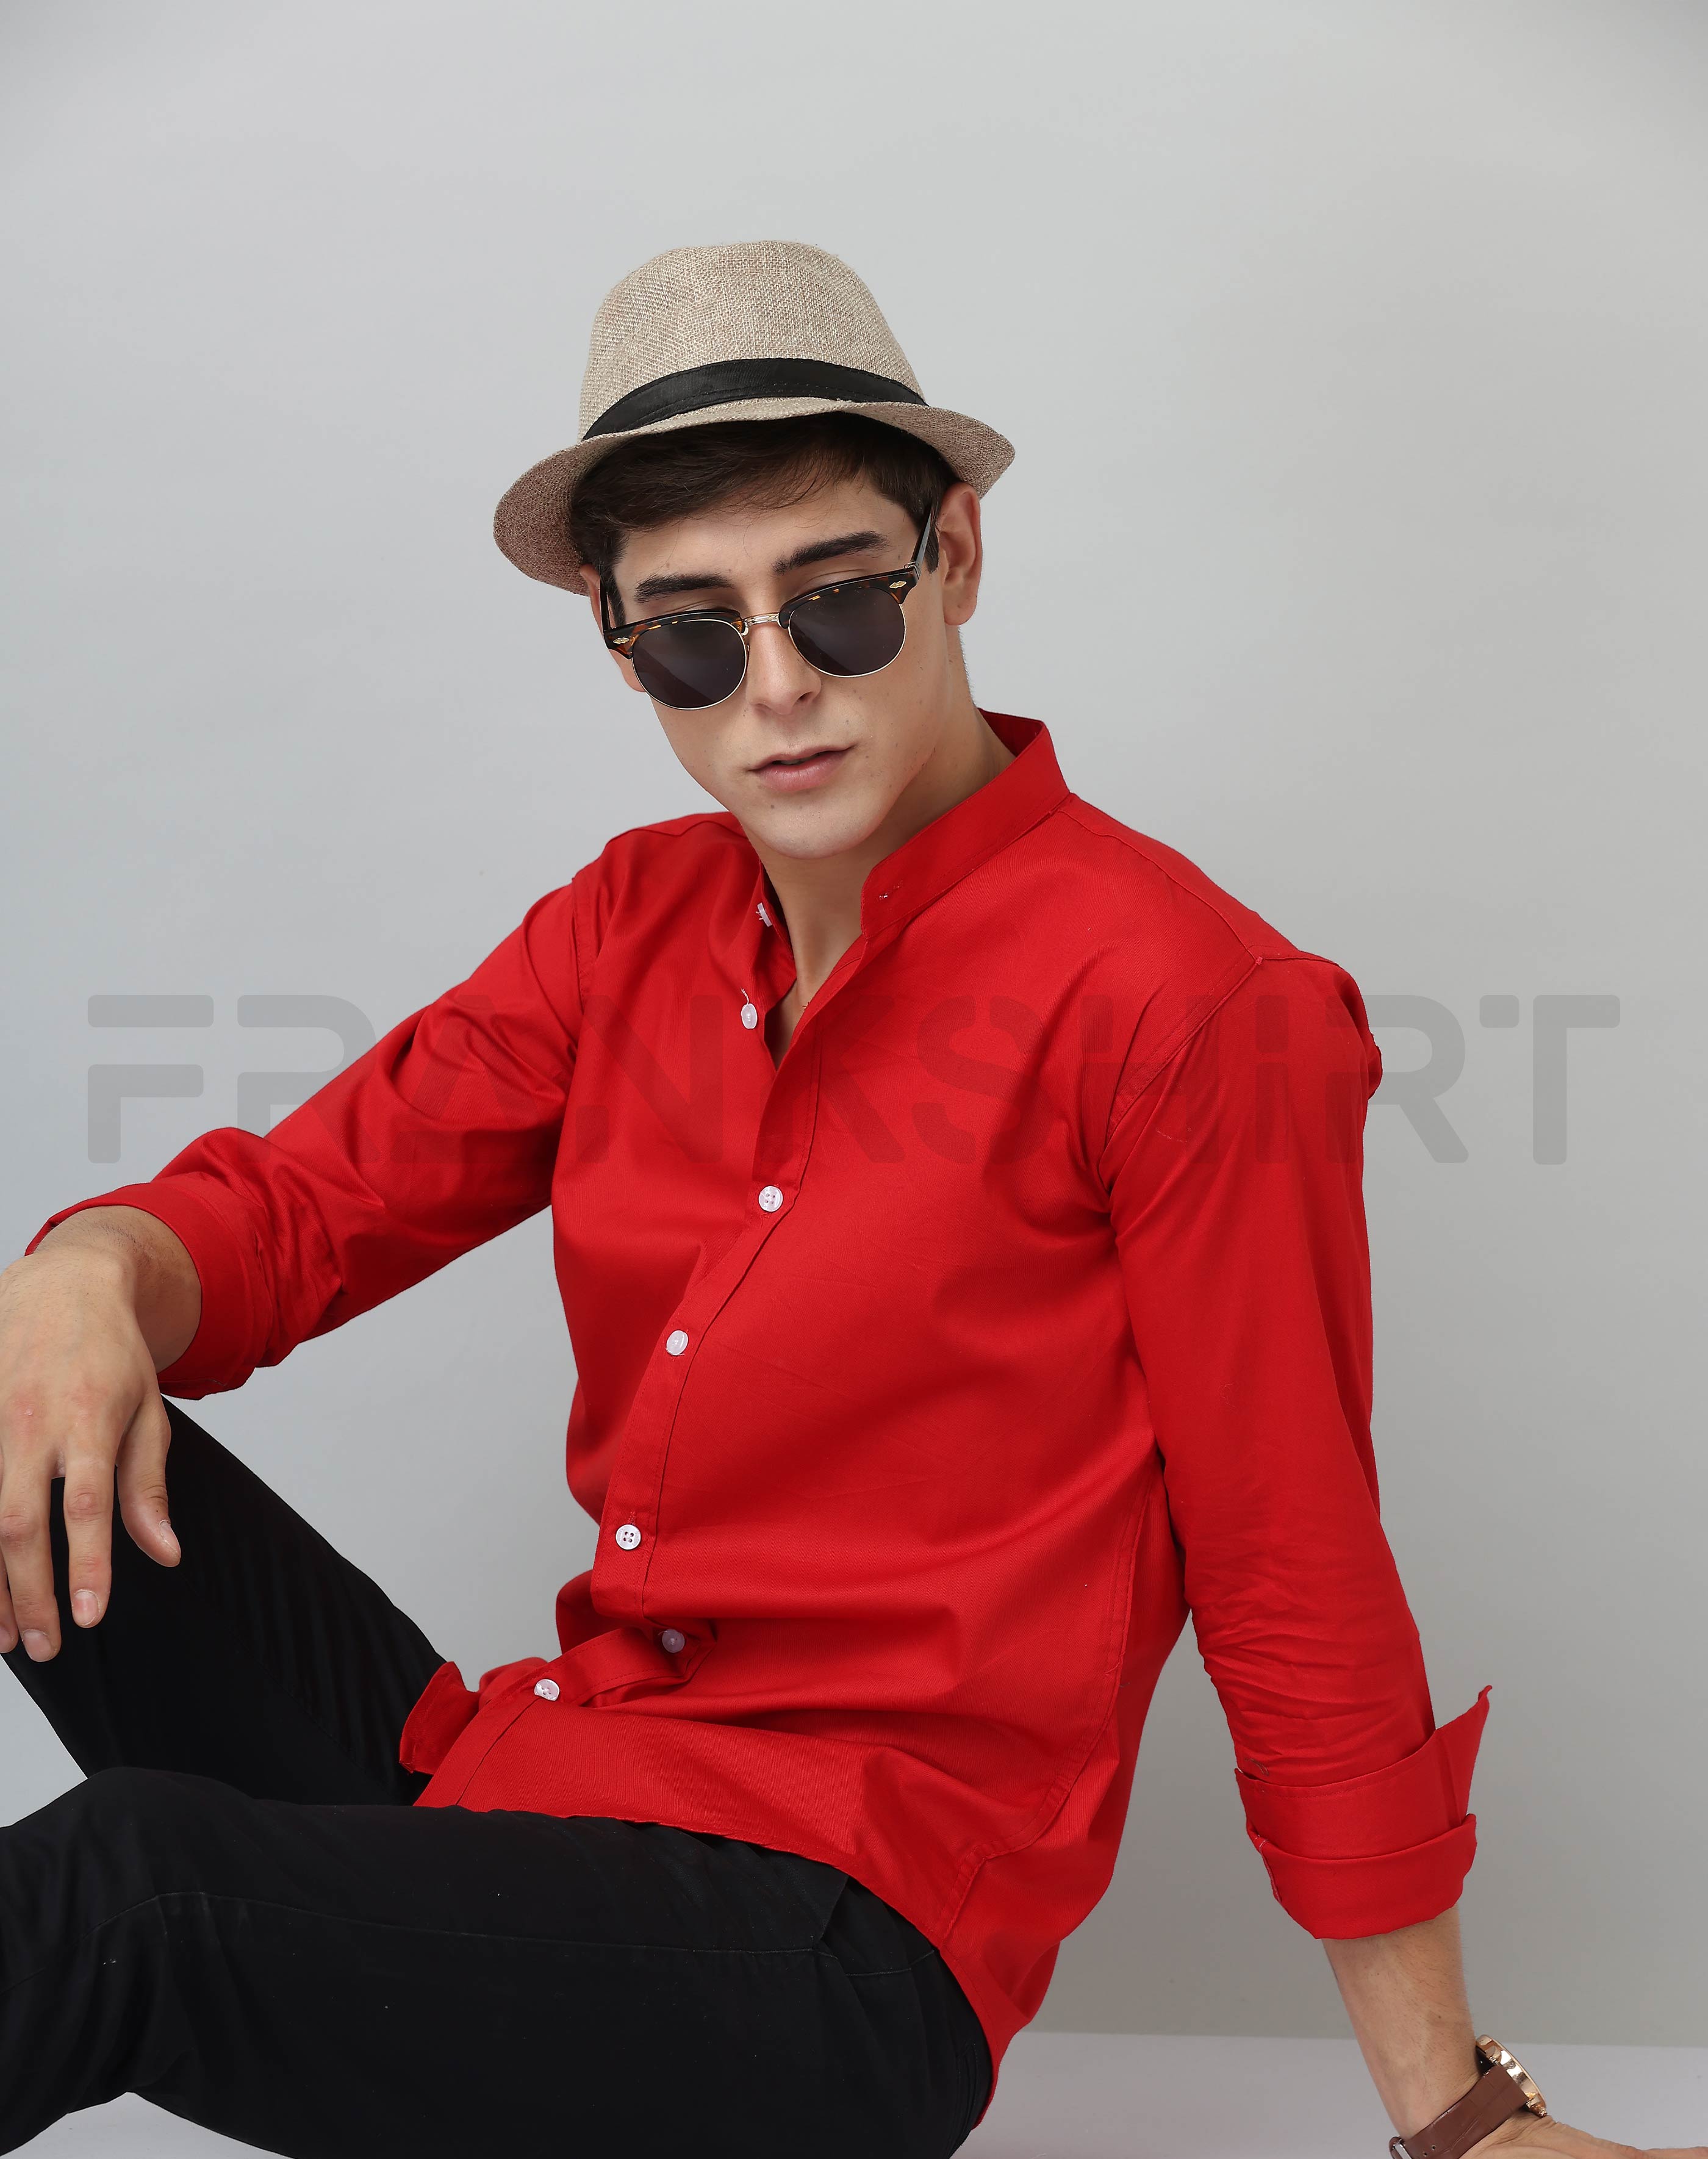 Frankshirt Chinese Collar Red Tailored Fit Cotton Casual Shirt for Man